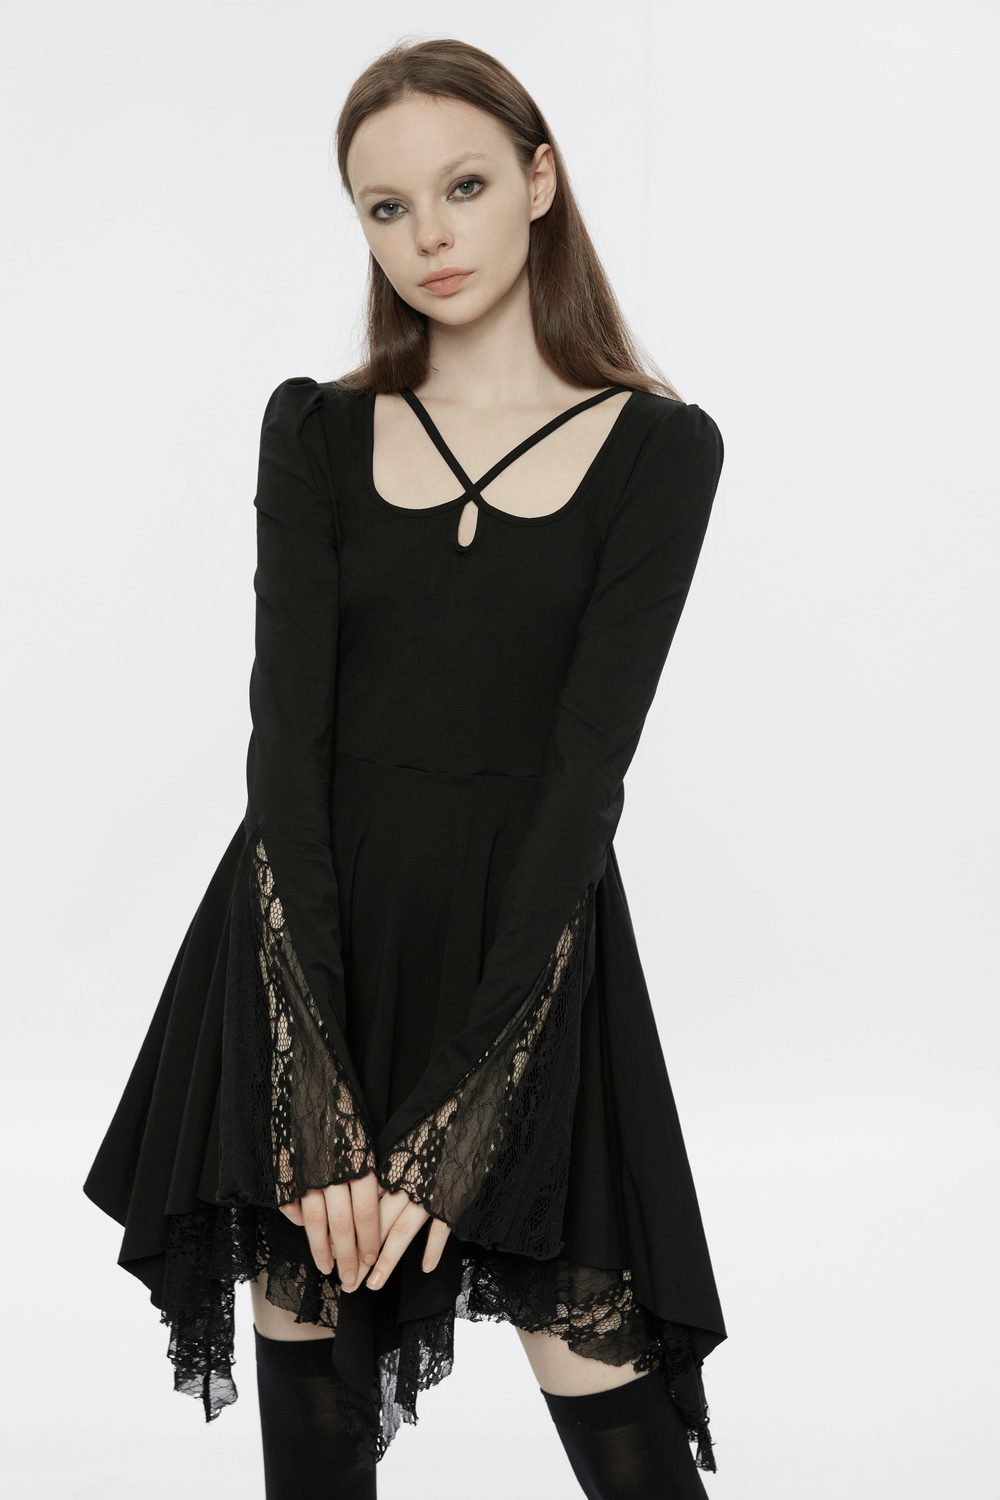 Punk Rave Black Gothic Dress with Lace Detailing